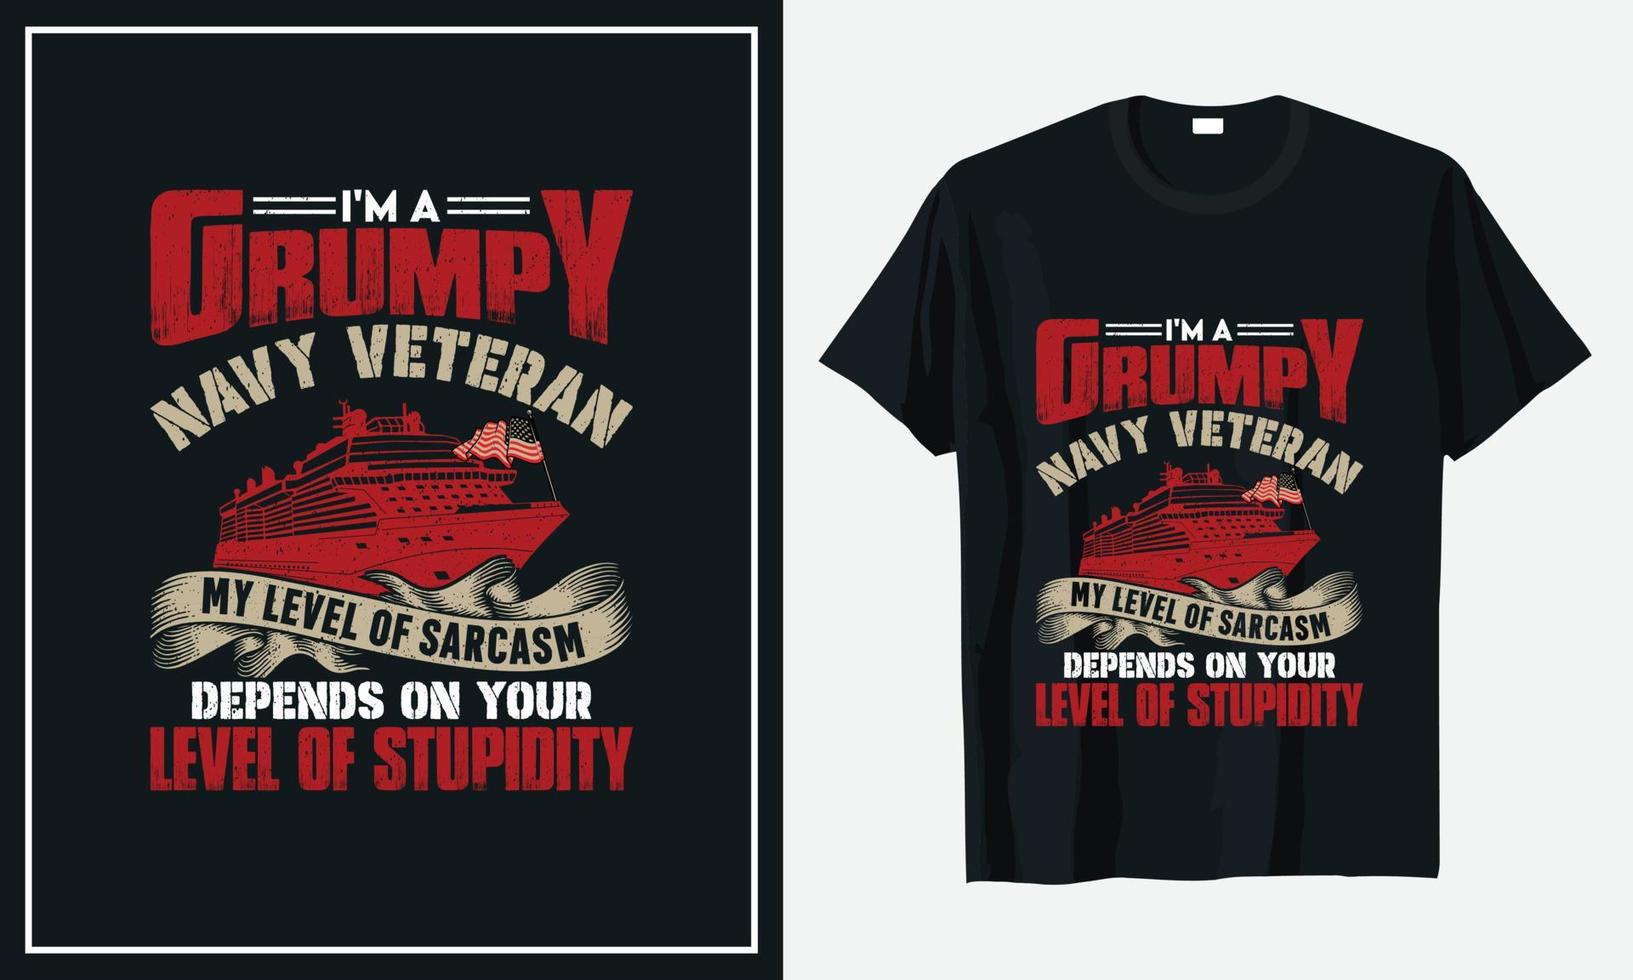 Veteran of the United States Army t-shirt design vector